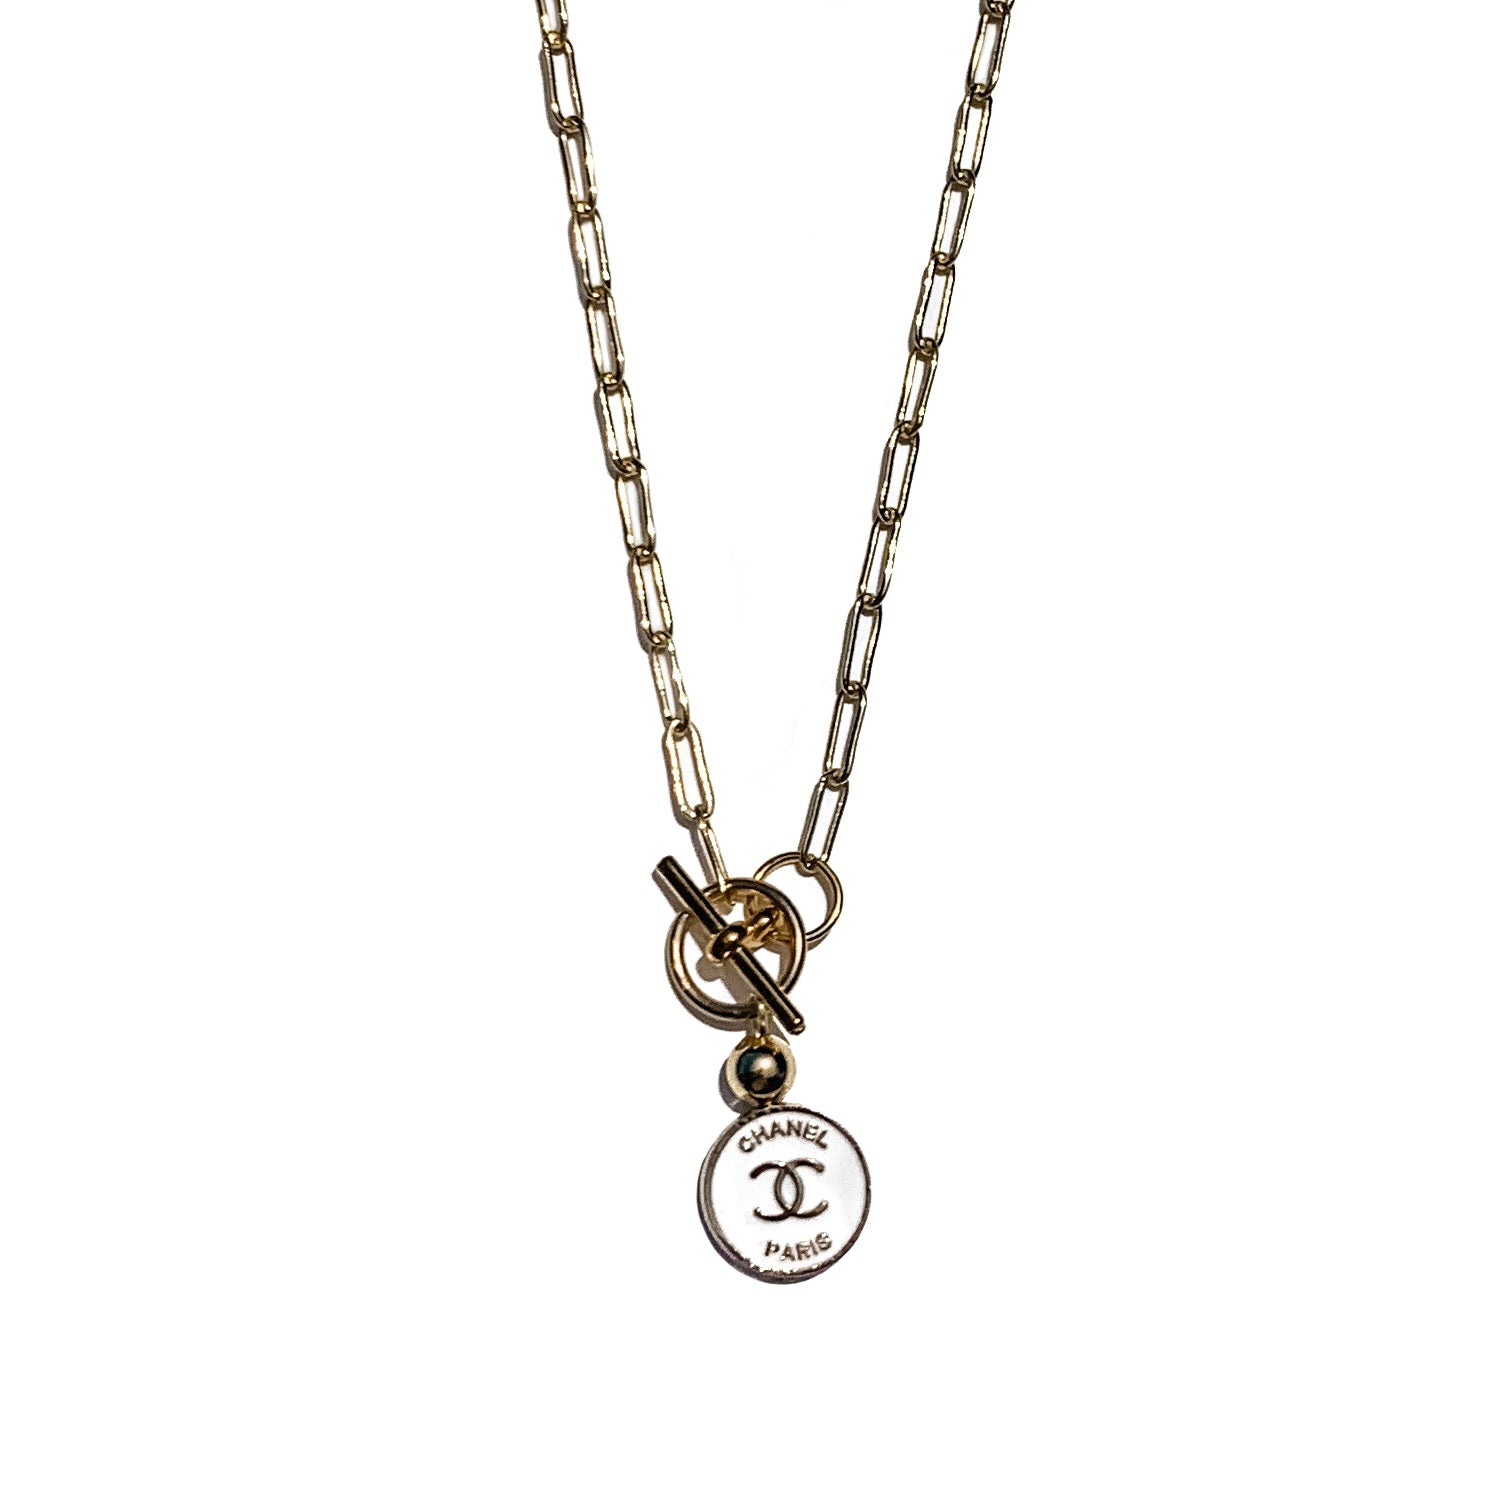 Vintage White & Gold Chanel Button Necklace